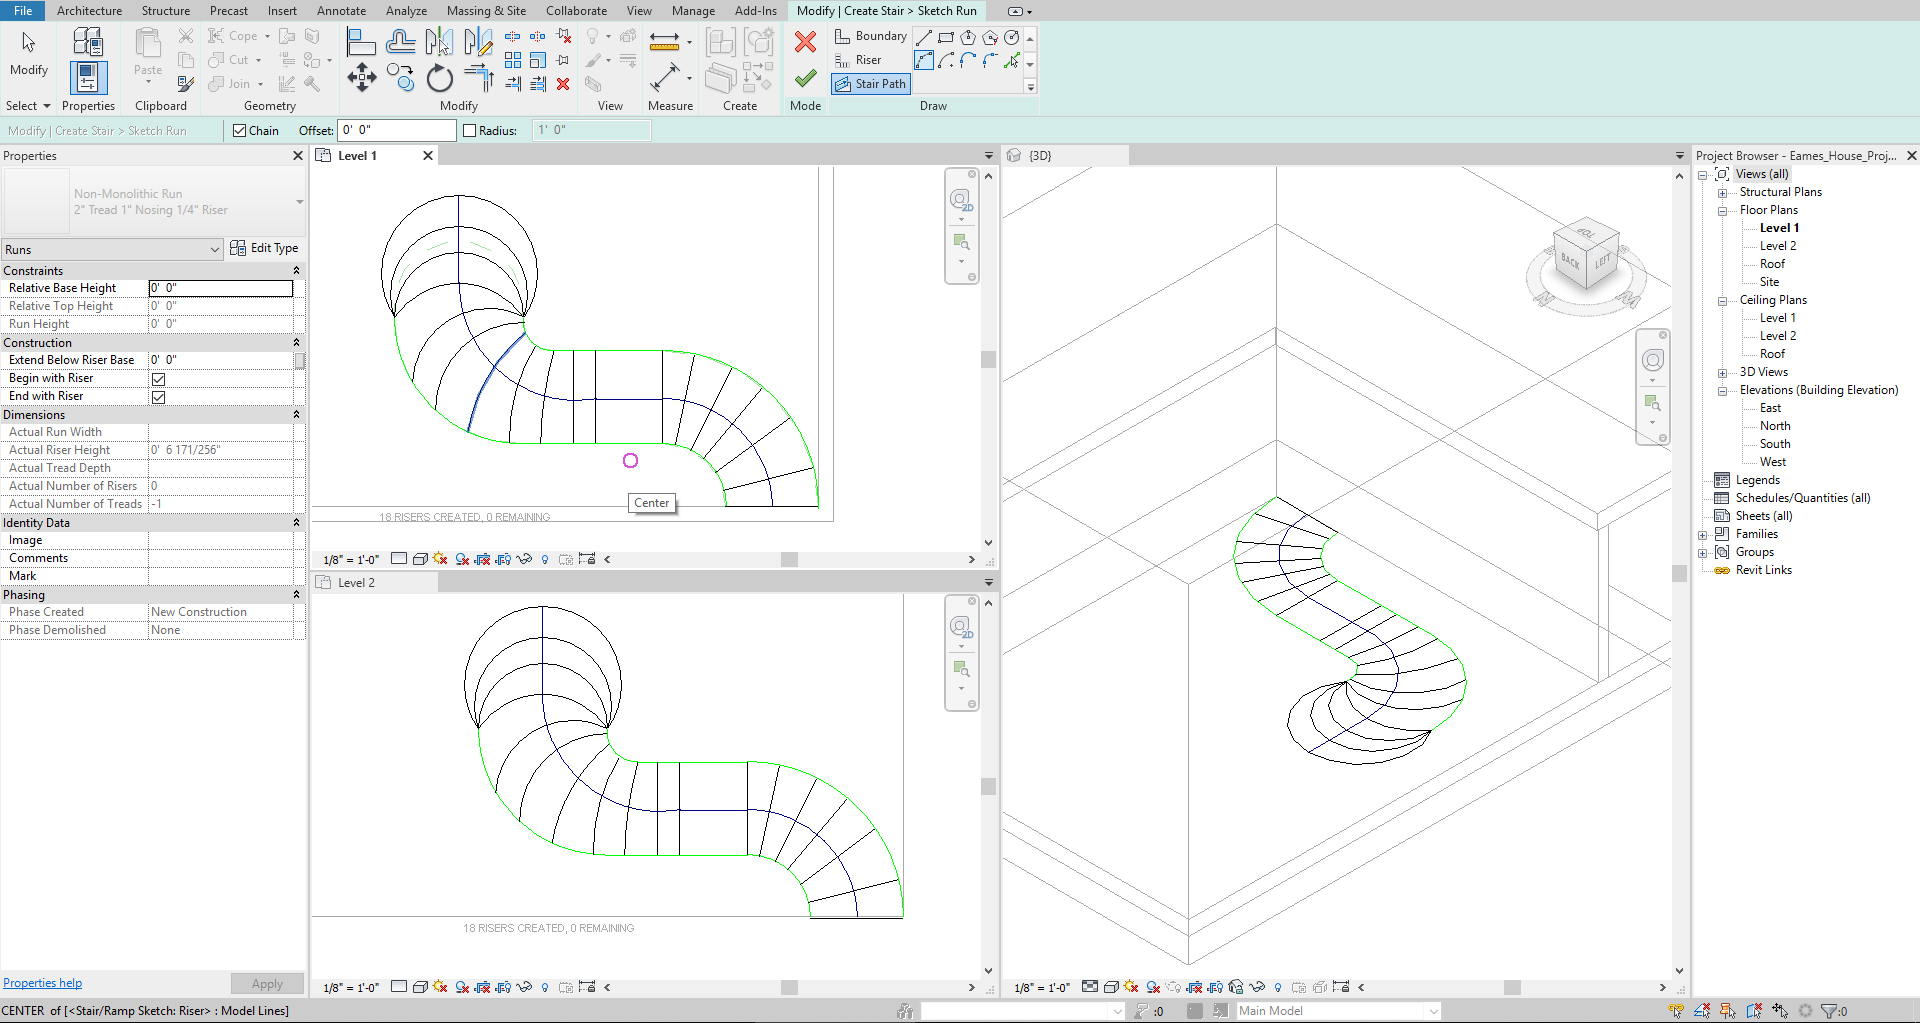 This image shows the sketches for the custom stair.